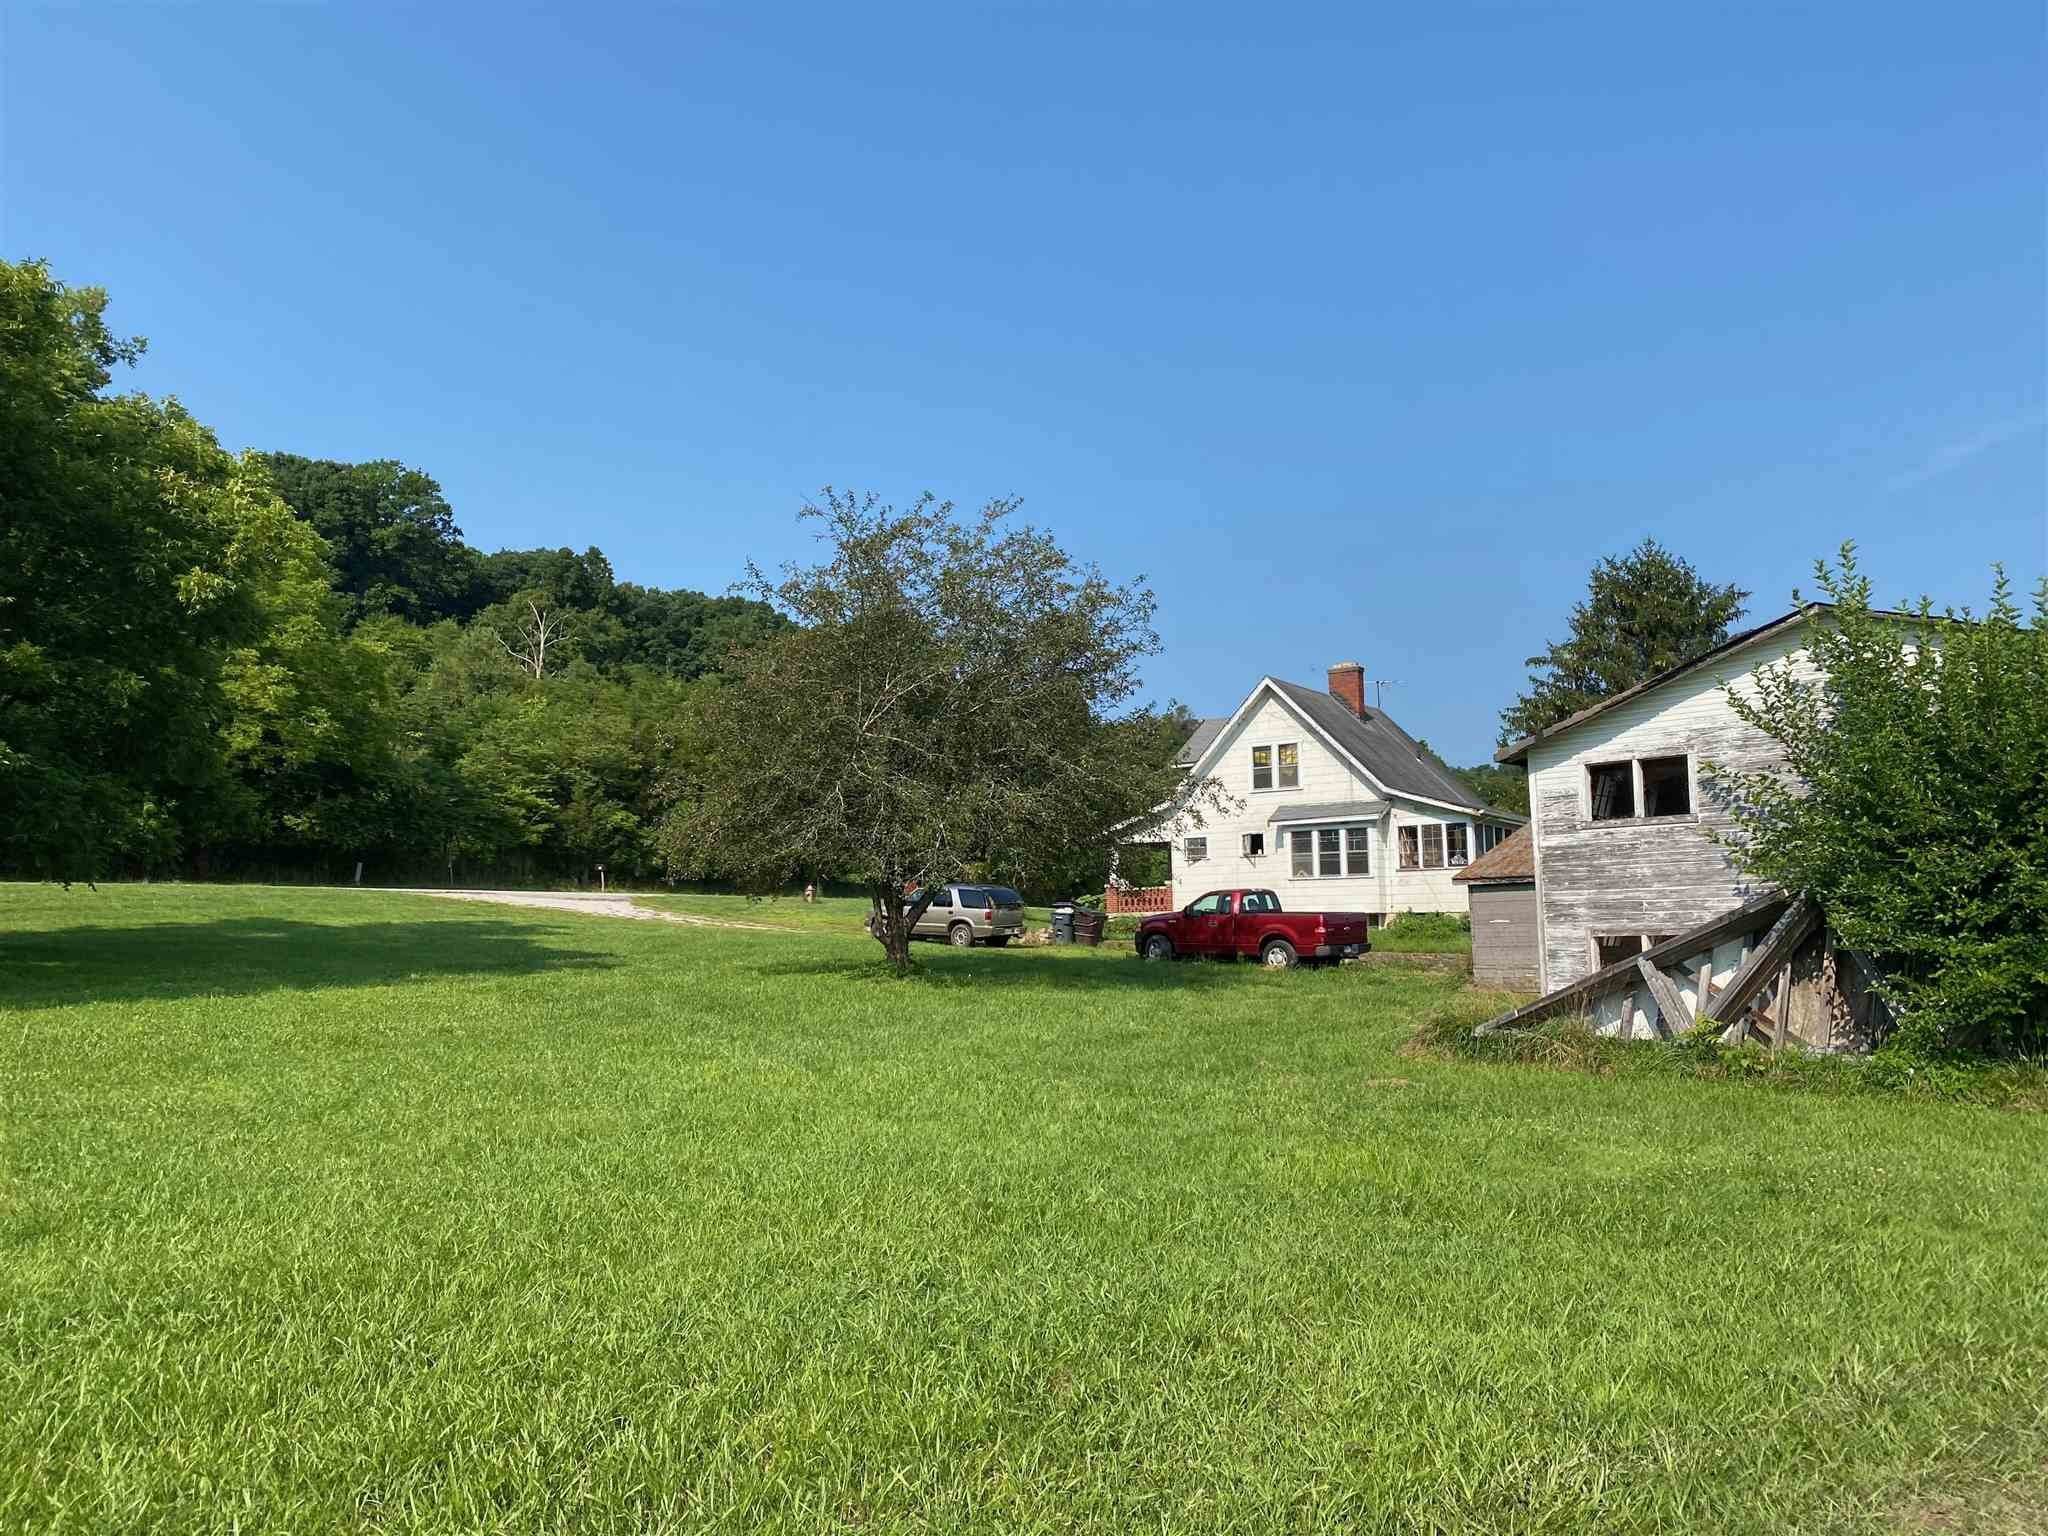 9. Land for Sale at 3826 Rich Road 3826 Rich Road Morning View, Kentucky 41063 United States